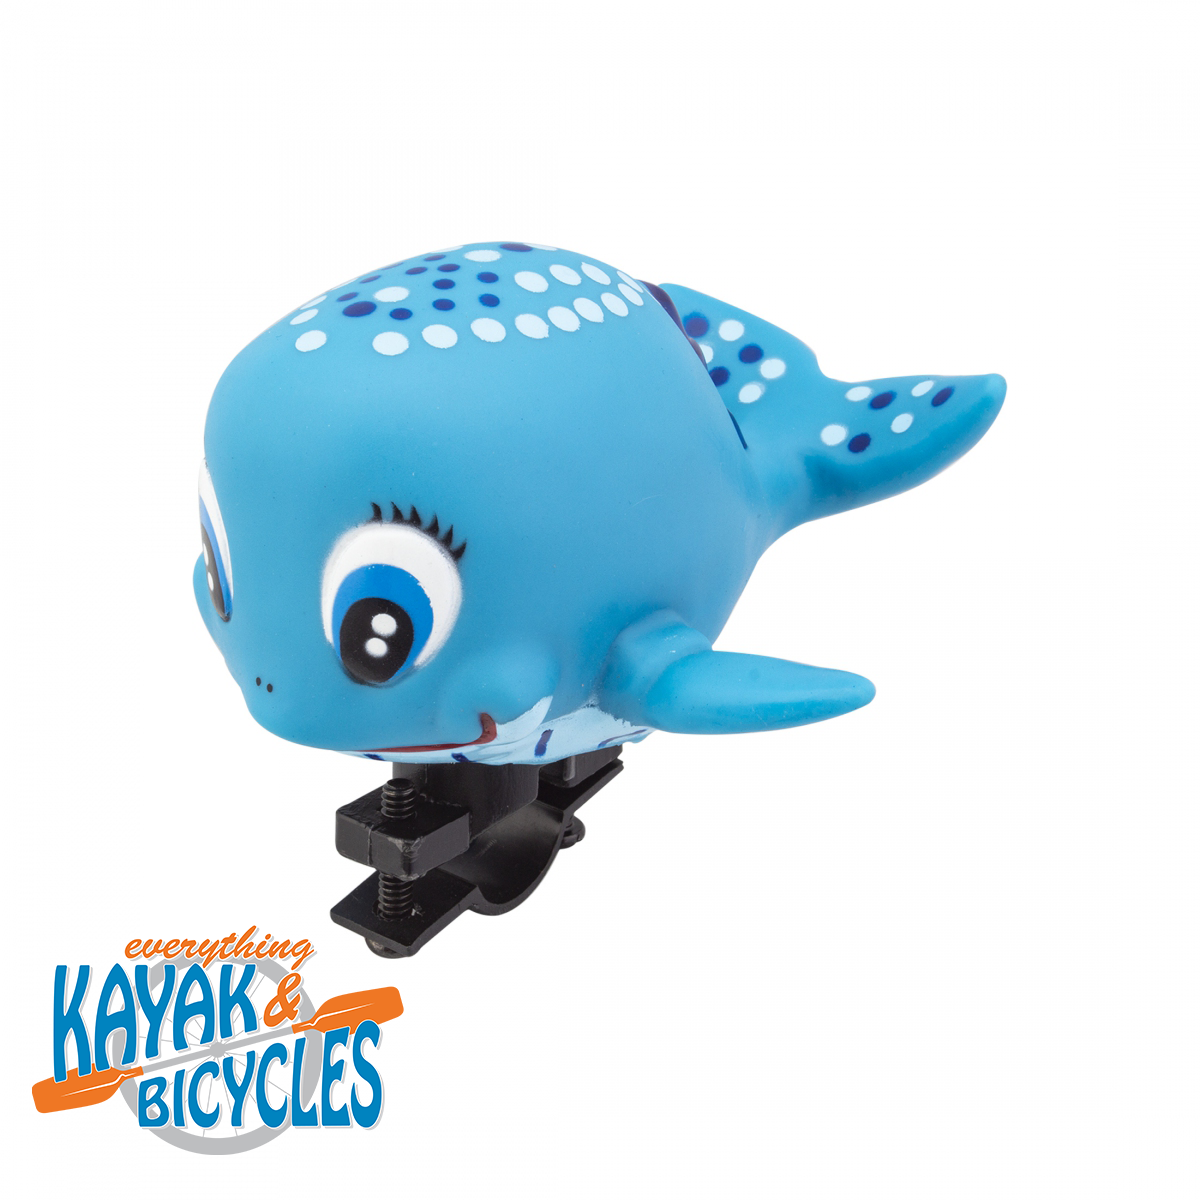 Whale Bike Horn 
Novelty horns that are great for kids and adults alike
Perfect for novice riders as well as serious riders who like a little flair, personality, or humor for their group rides
Fits most handlebars